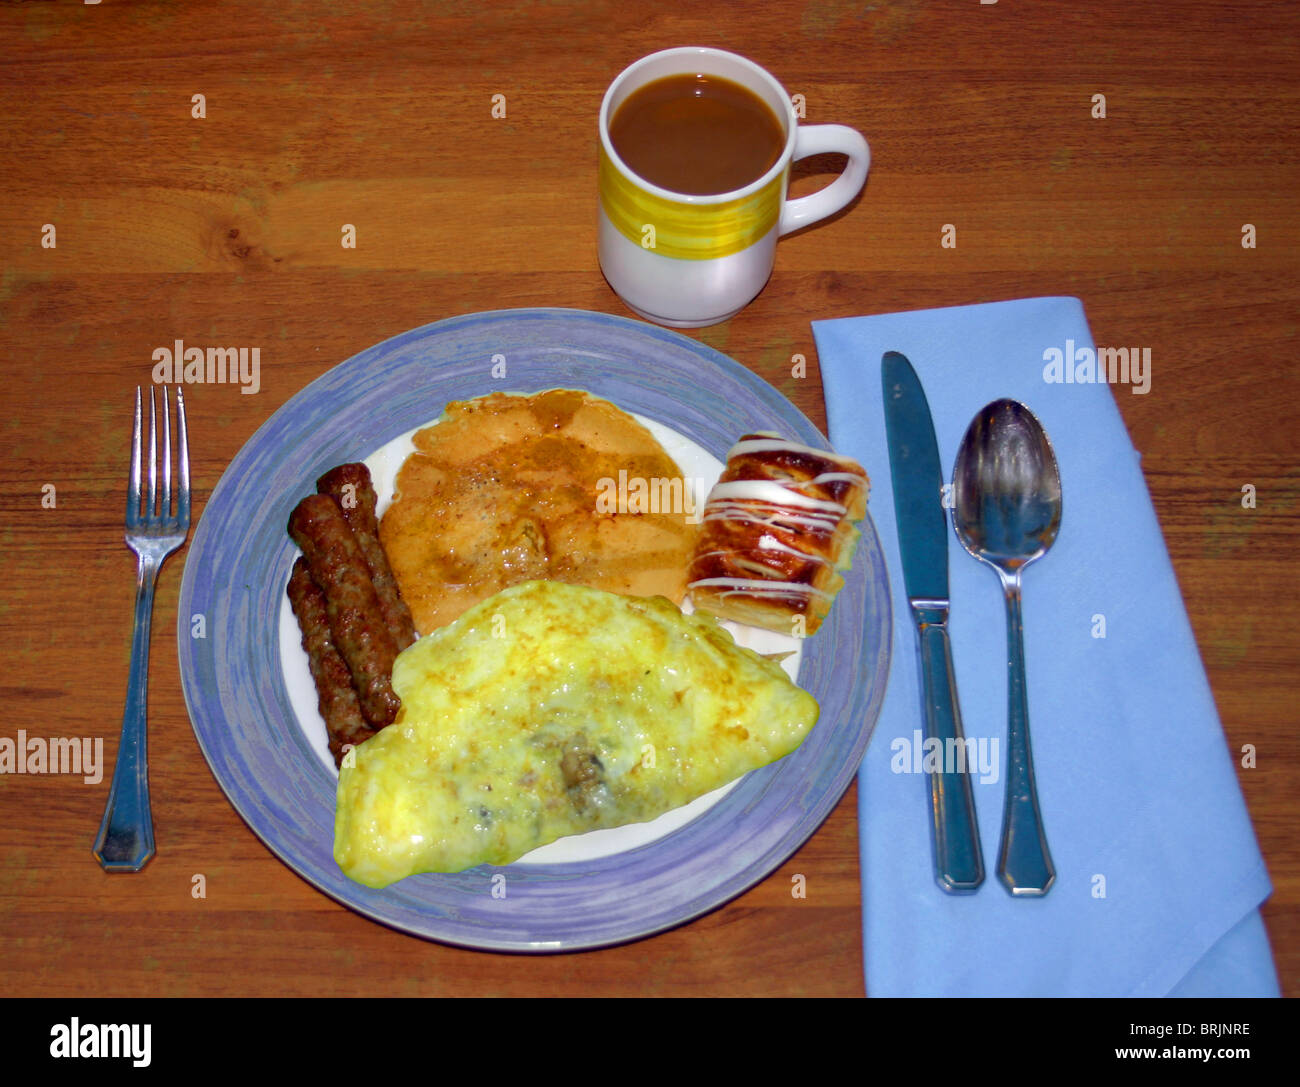 Morning breakfast meal with sausage, egg omelet, pancake, small sweet roll, and a cup of coffee.  All with blue and white plate. Stock Photo